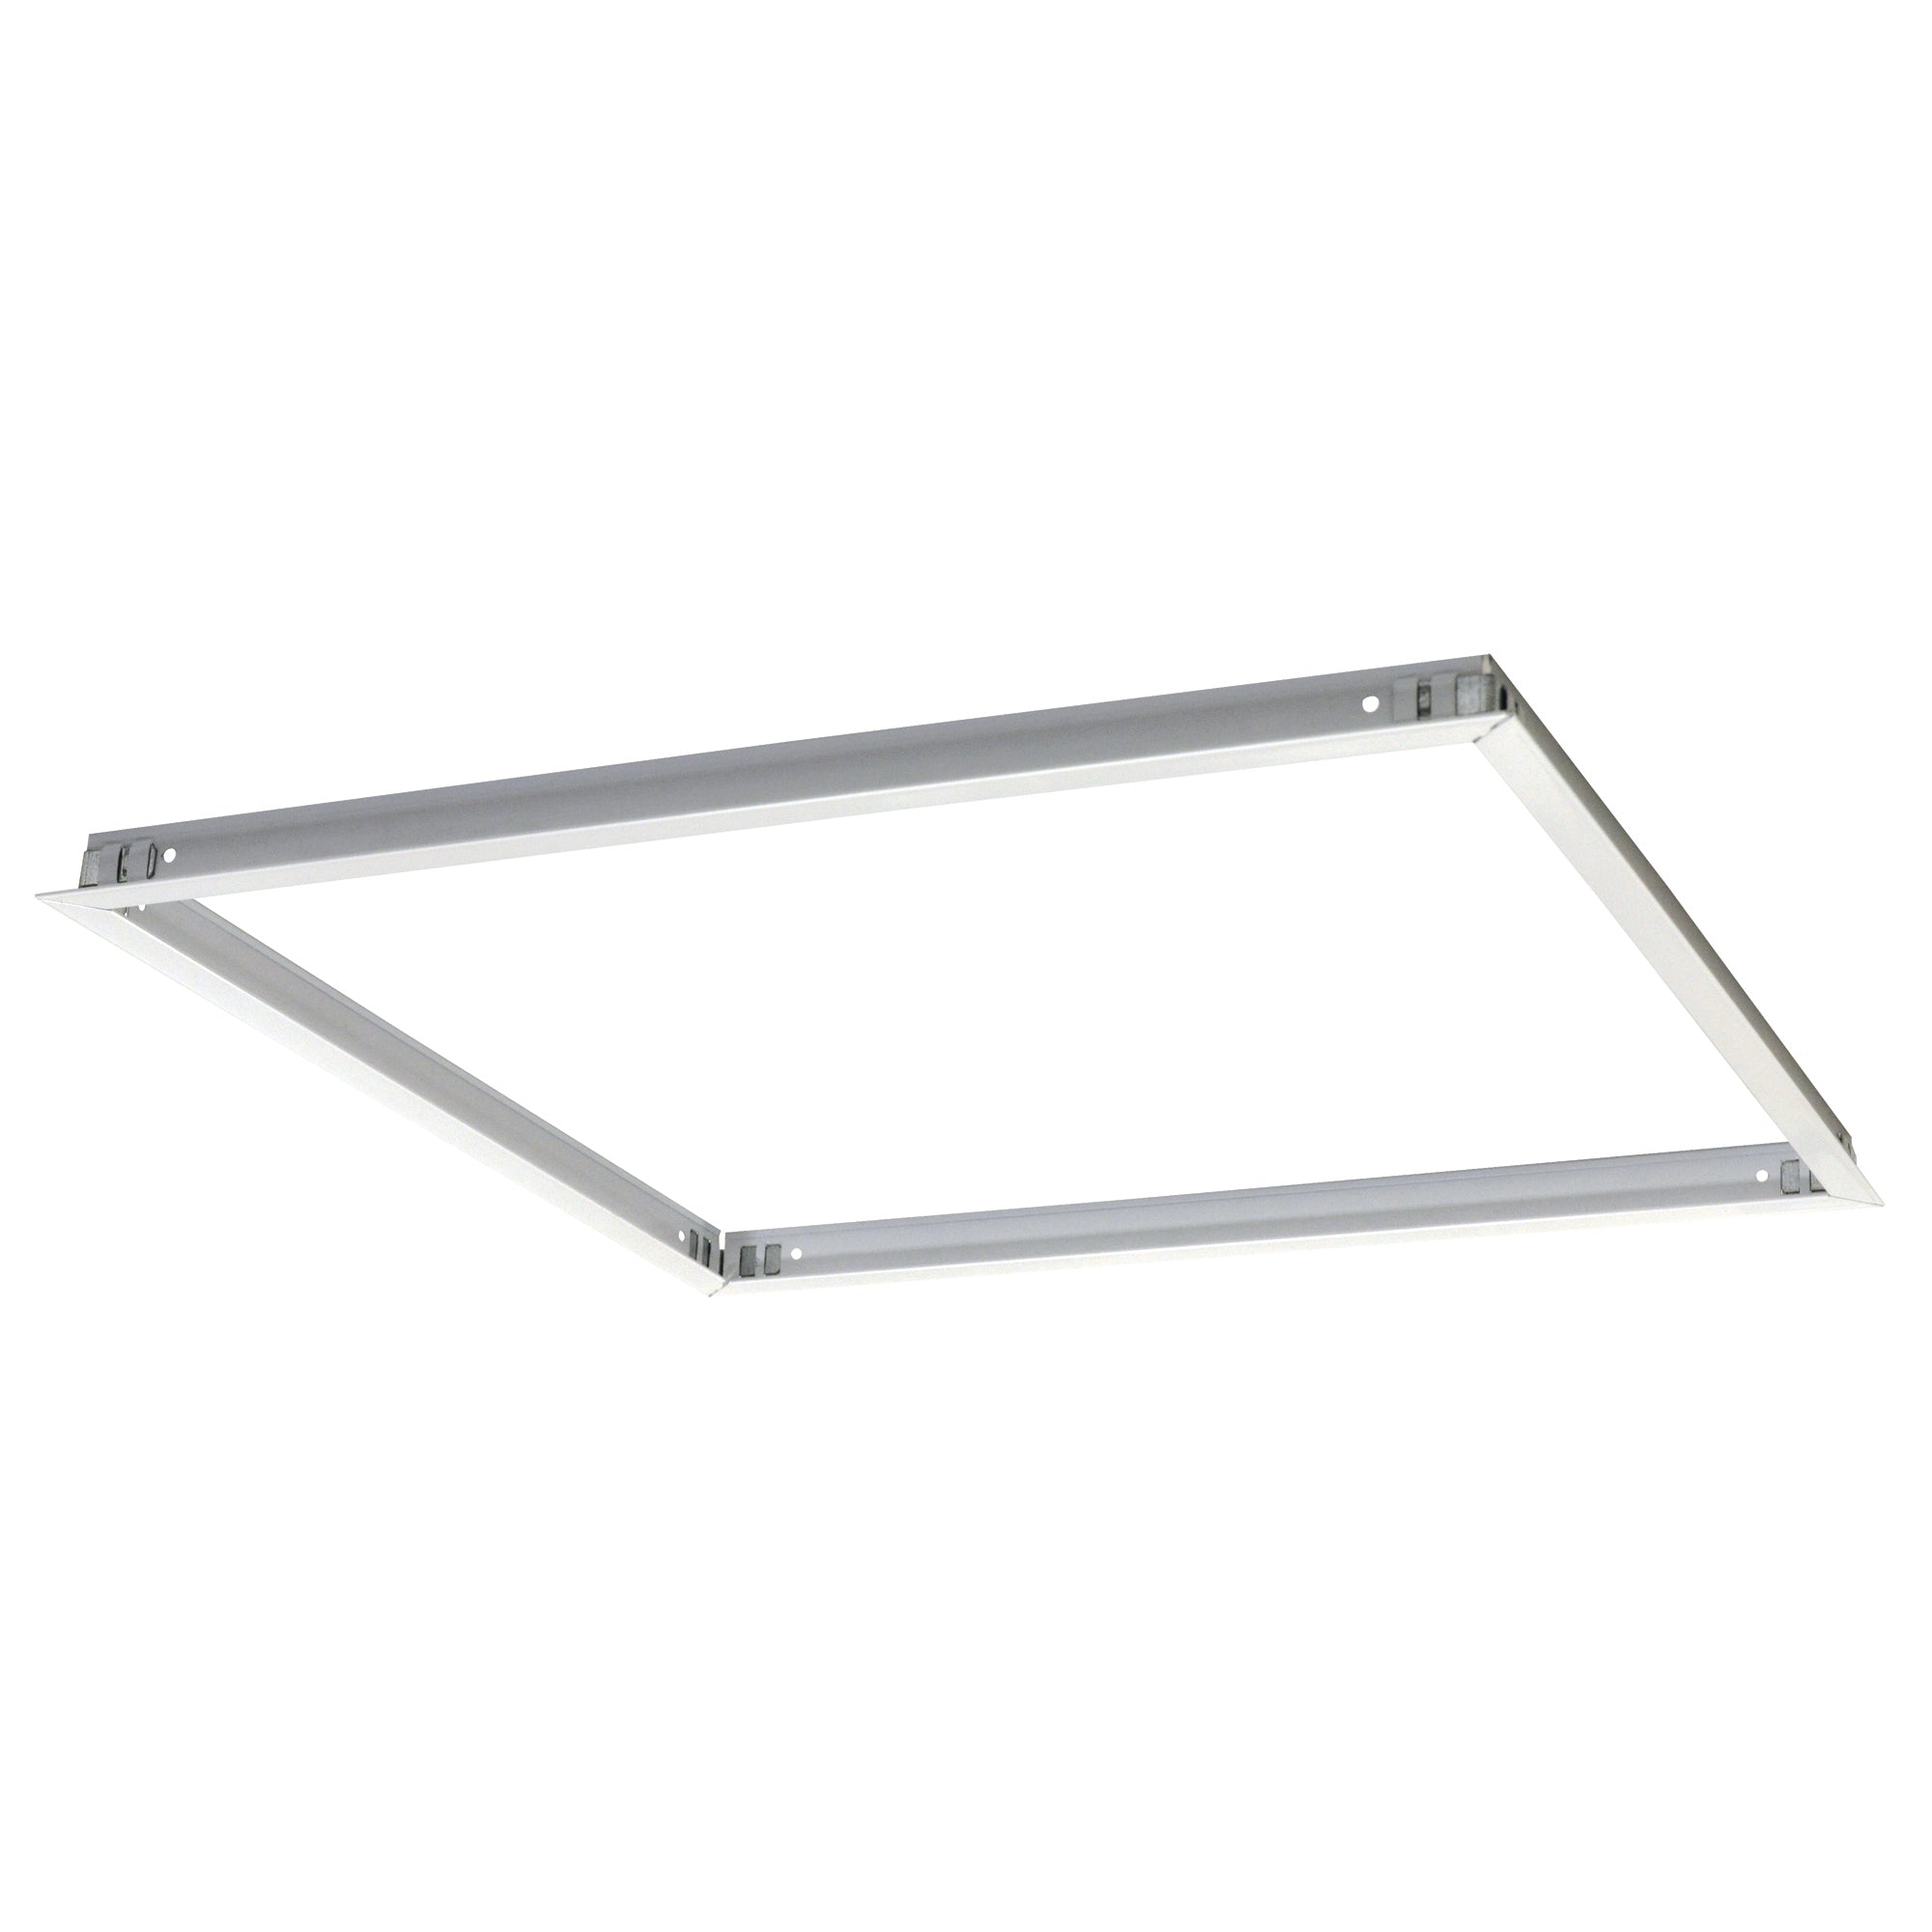 Nora Lighting NPDBL-22RFK/W - Recessed - Recessed Mounting Kit for 2'x2' LED Backlit Panels